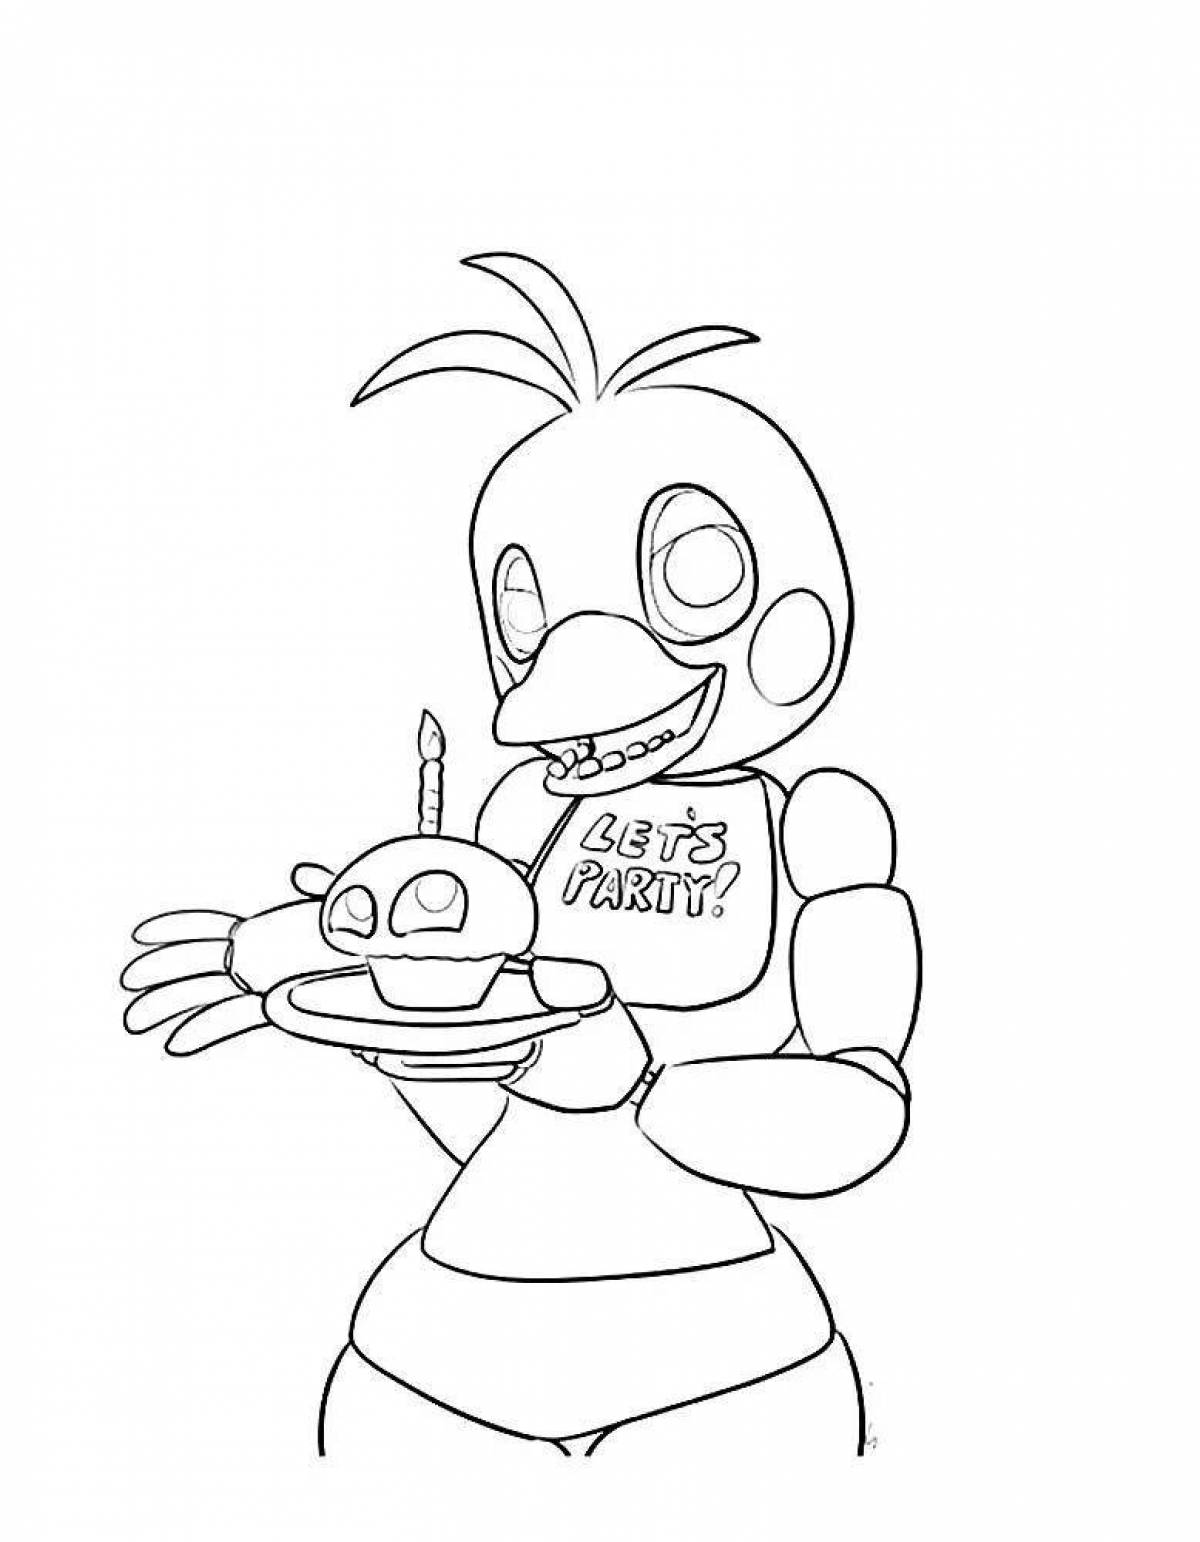 Amazing Chica fnaf coloring book